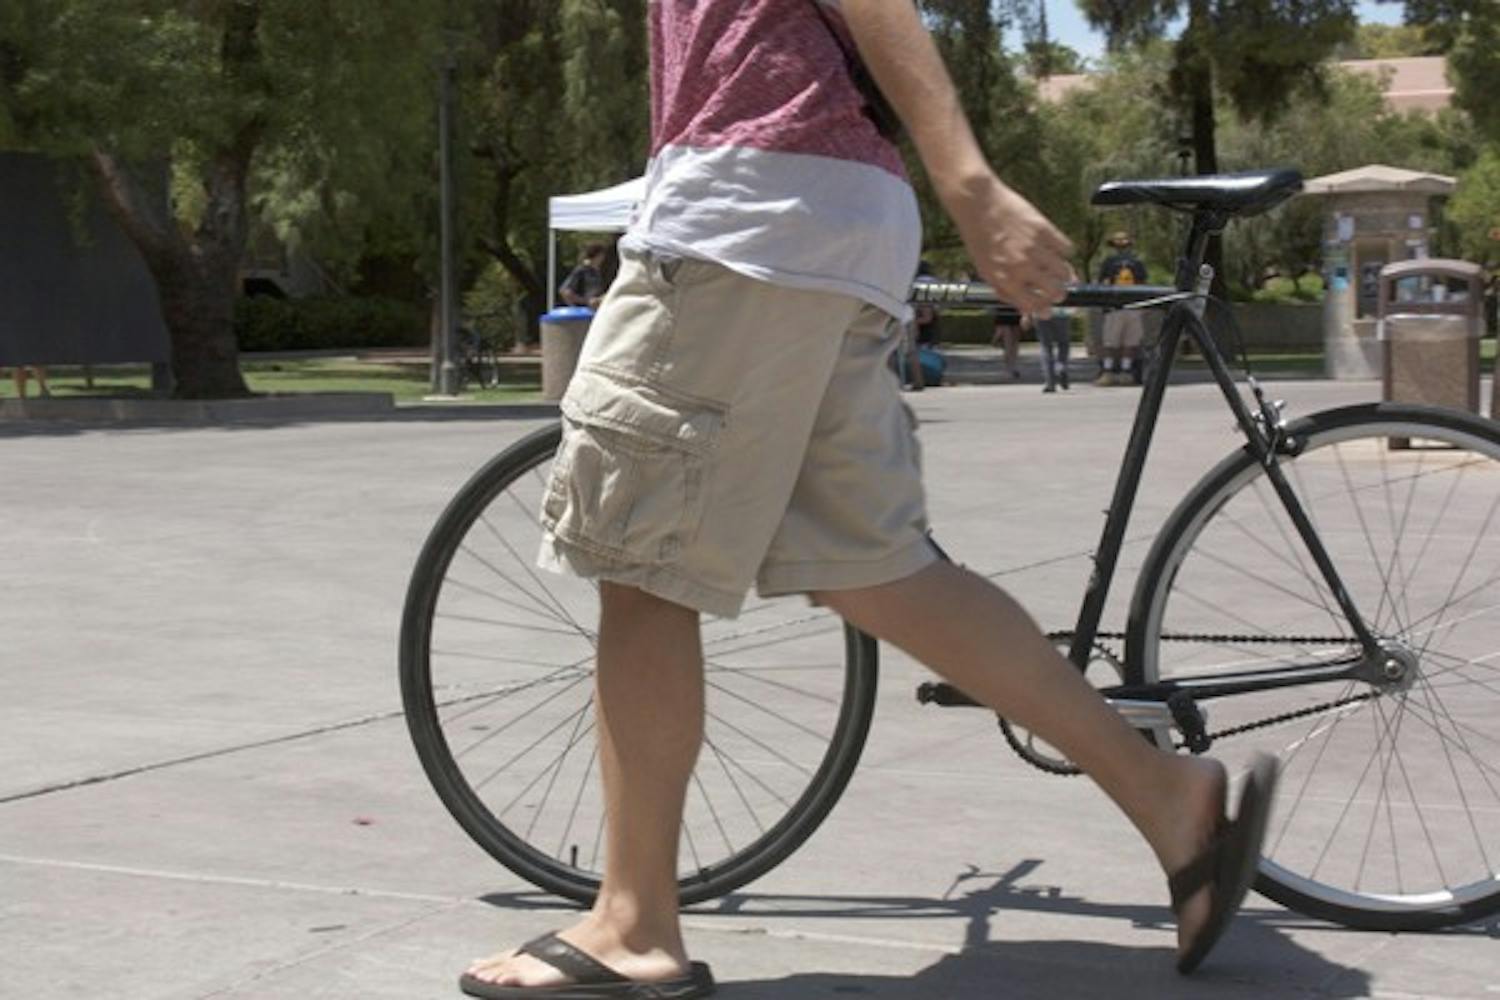 A student walks his bike through the Tempe campus.  A new campaign "Walk Your Wheels" encourages students to walk rather than ride bikes and skateboards through crowded areas on campus. (Photo by Shawn Raymundo)